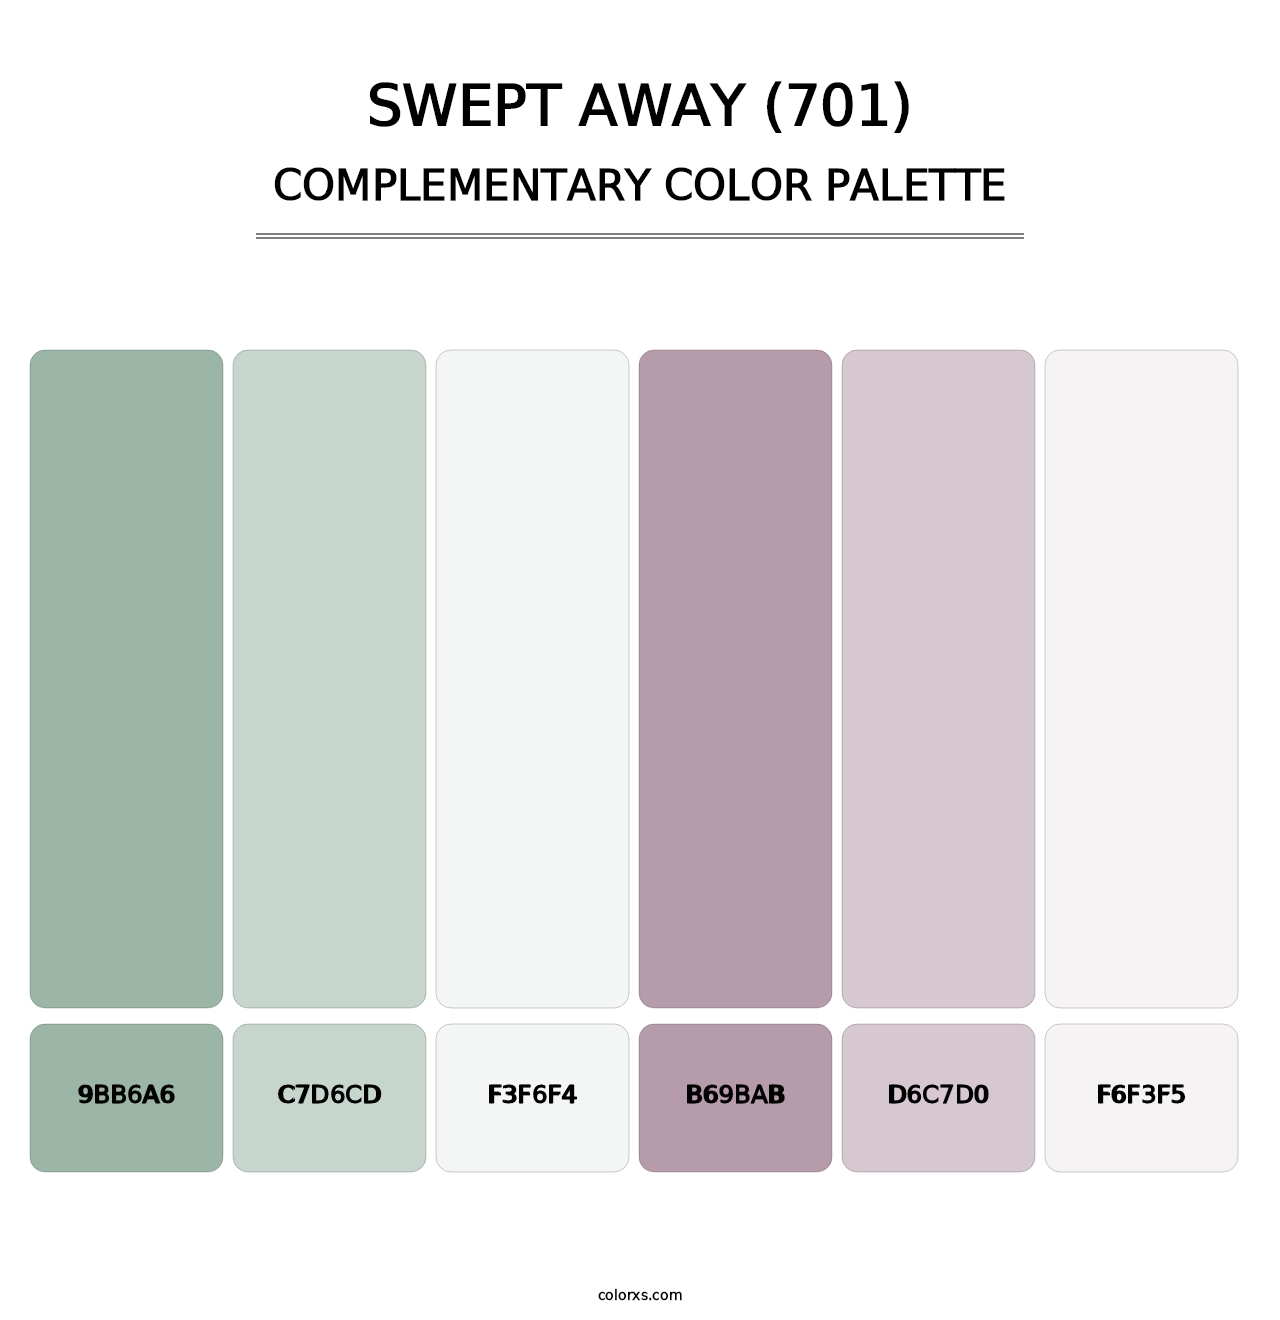 Swept Away (701) - Complementary Color Palette